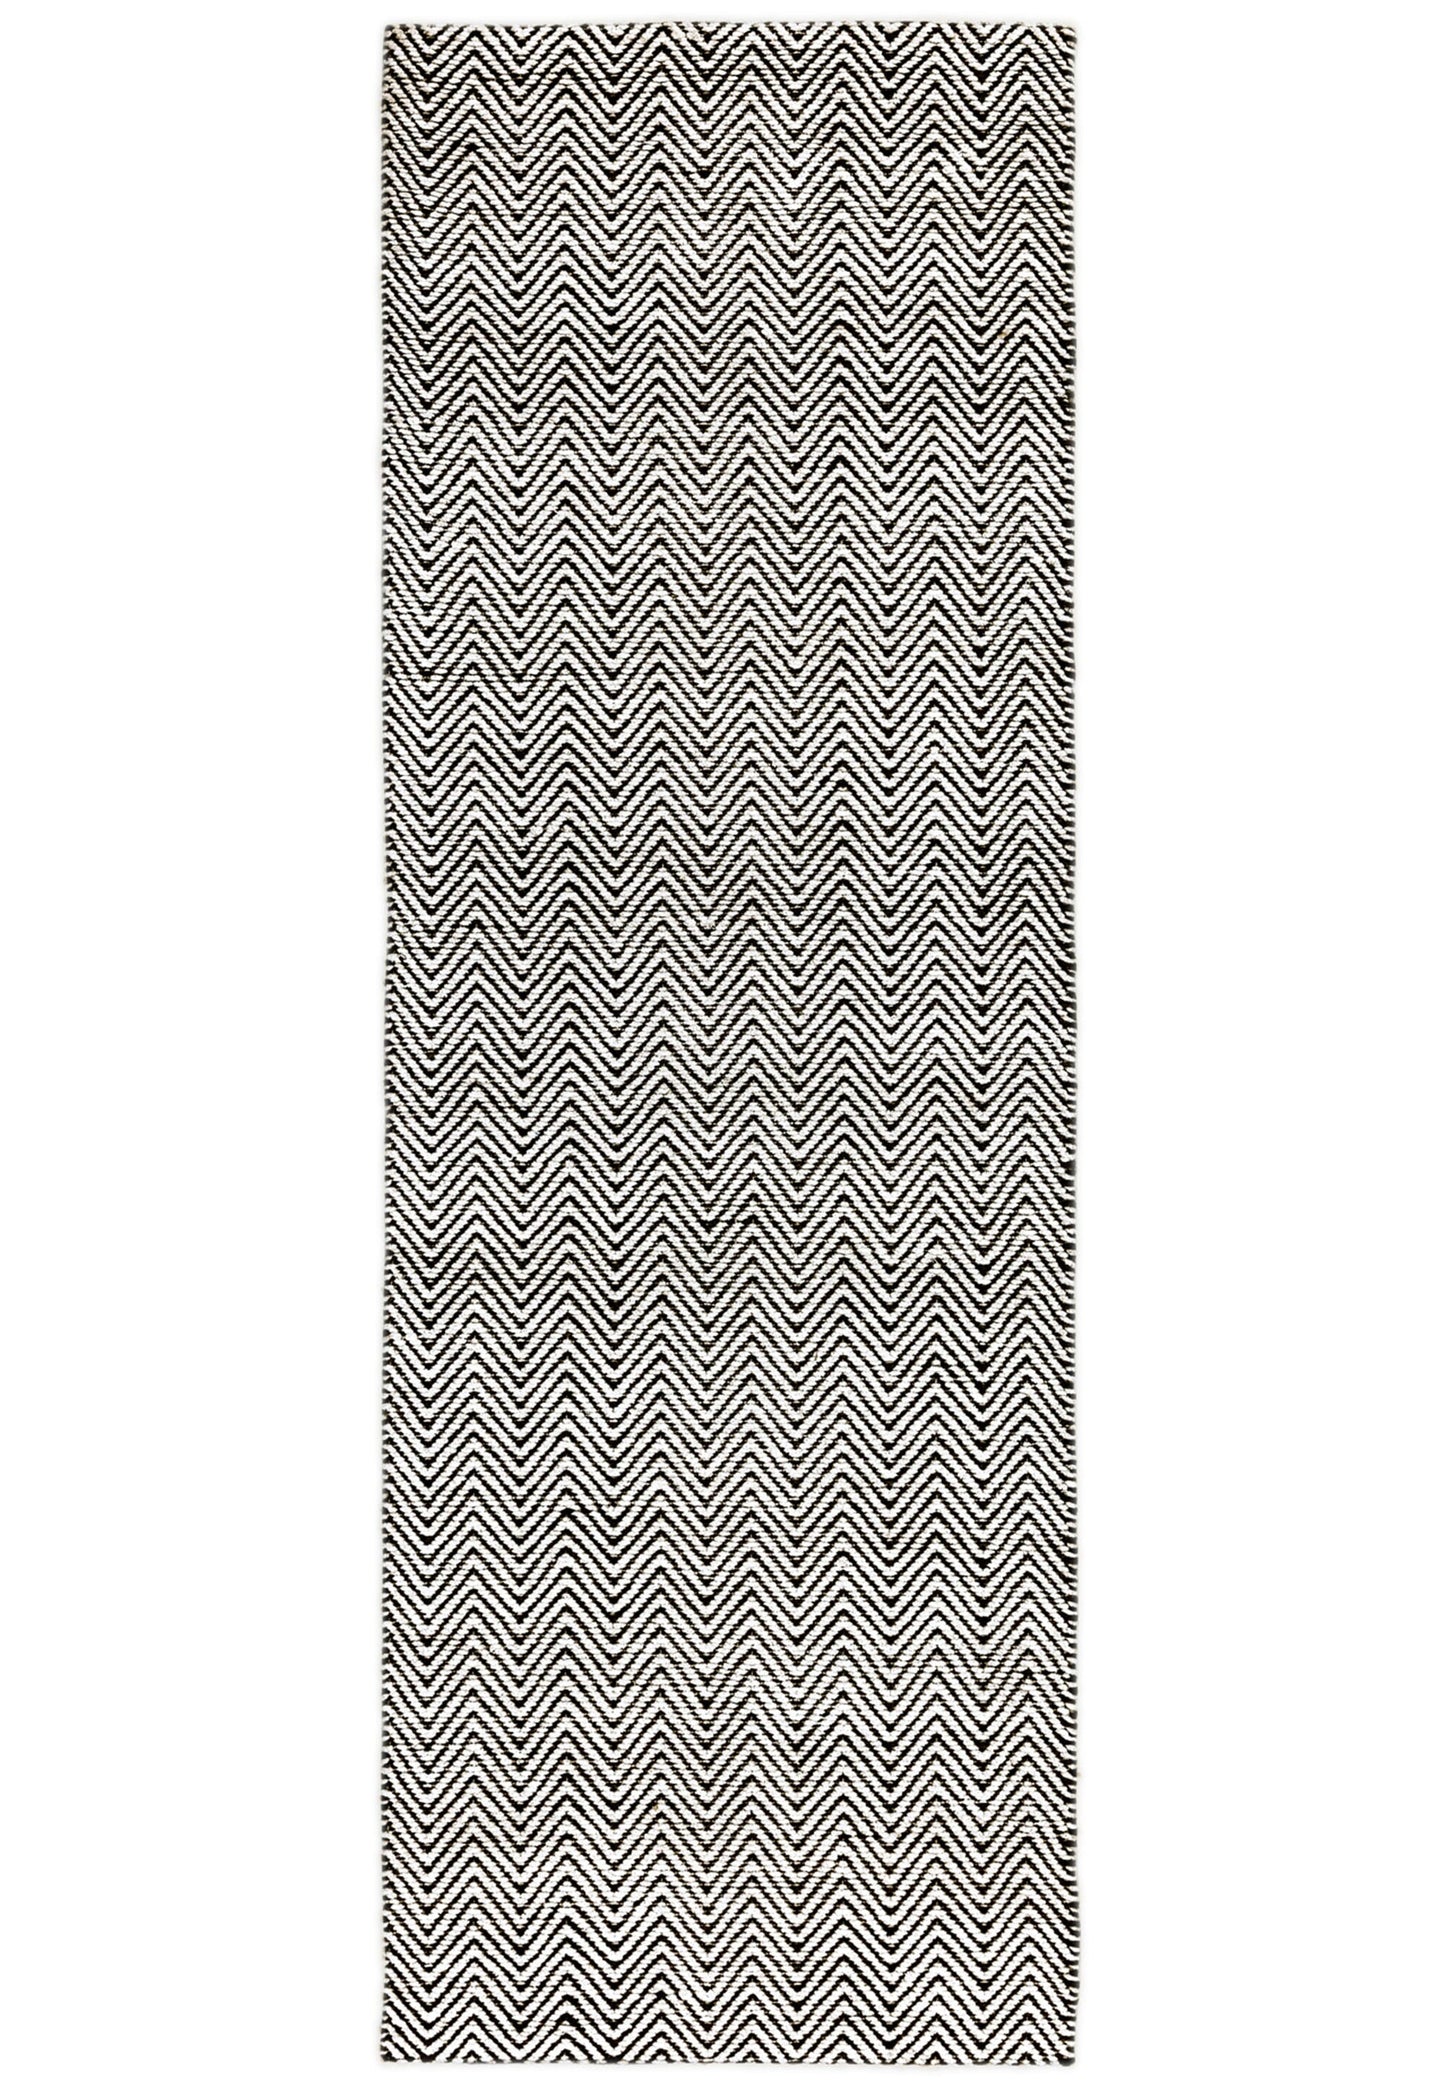 Asiatic Carpets Ives Hand Woven Rug Black White - 160 x 230cm